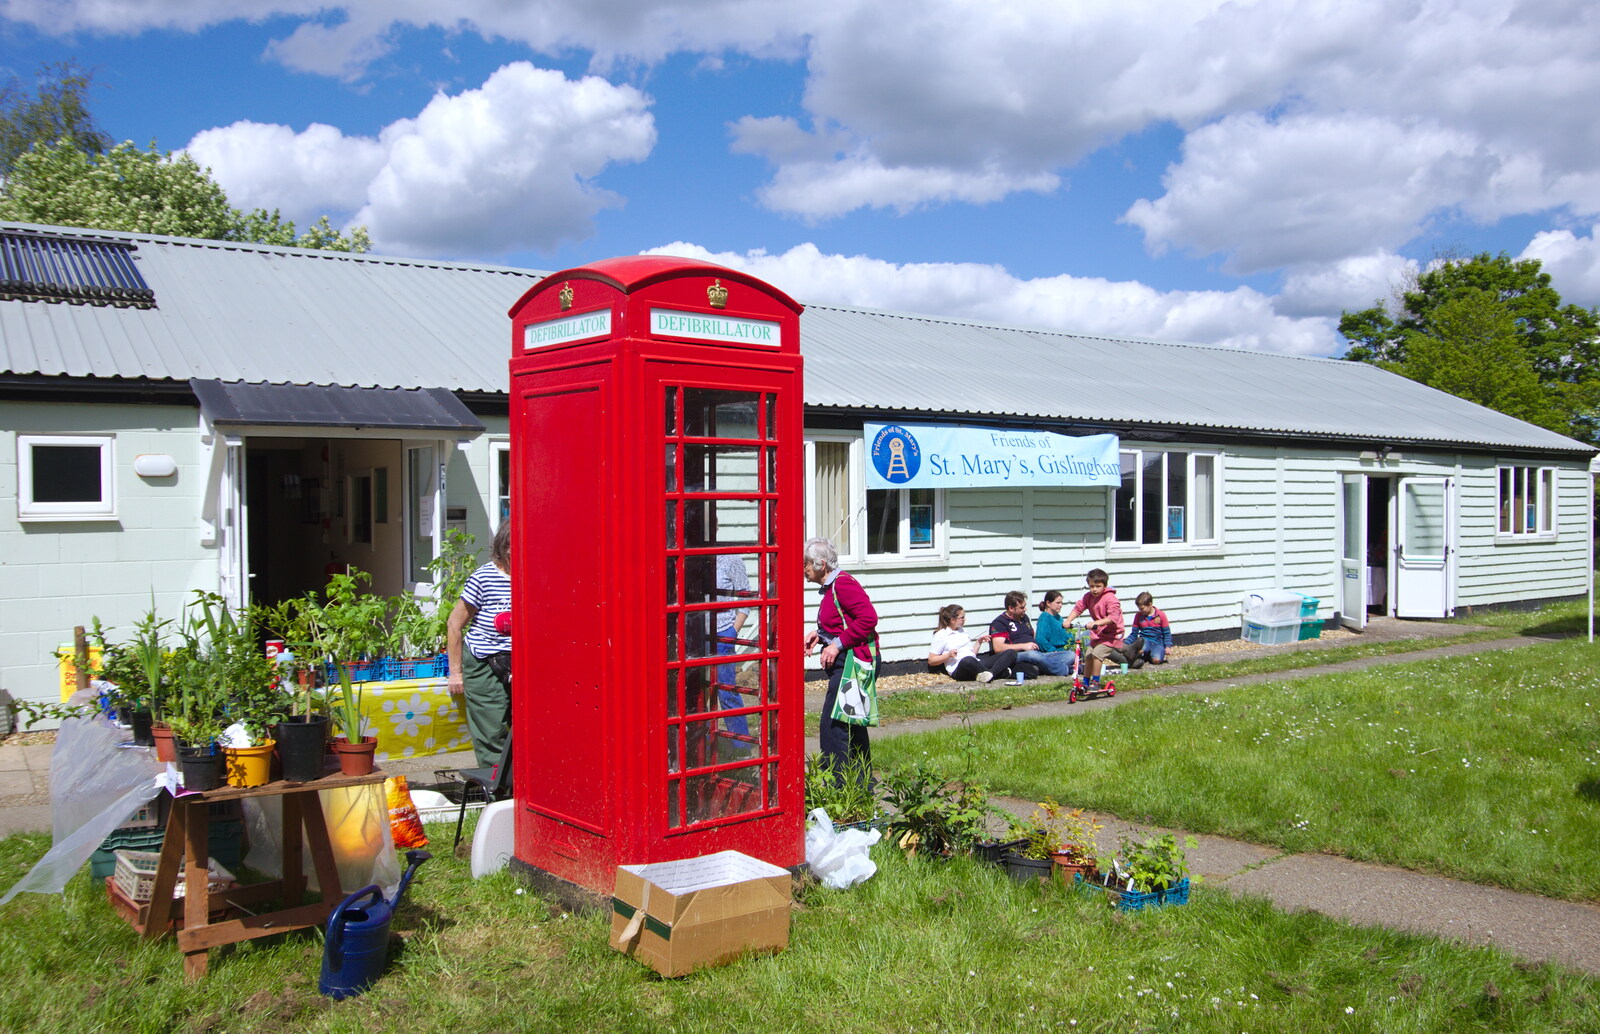 A bright red K6 phone box outside the village hall from The Gislingham Silver Band at the Village Hall, Gislingham, Suffolk - 12th May 2019